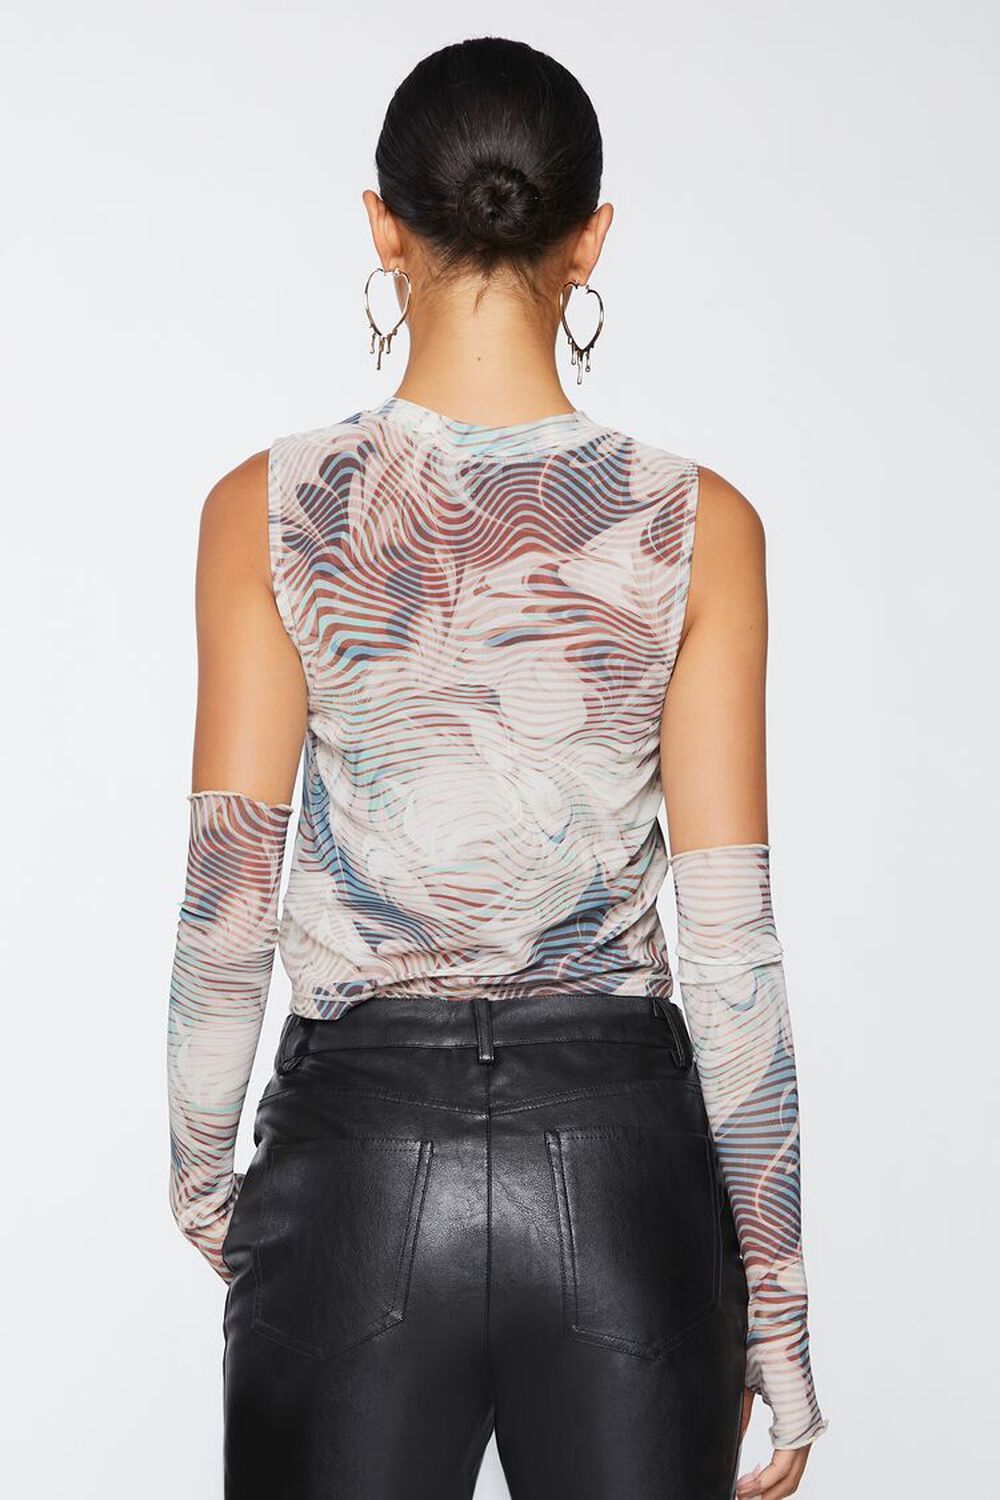 OASIS/MULTI Abstract Mesh Crop Top & Gloves Set, image 3